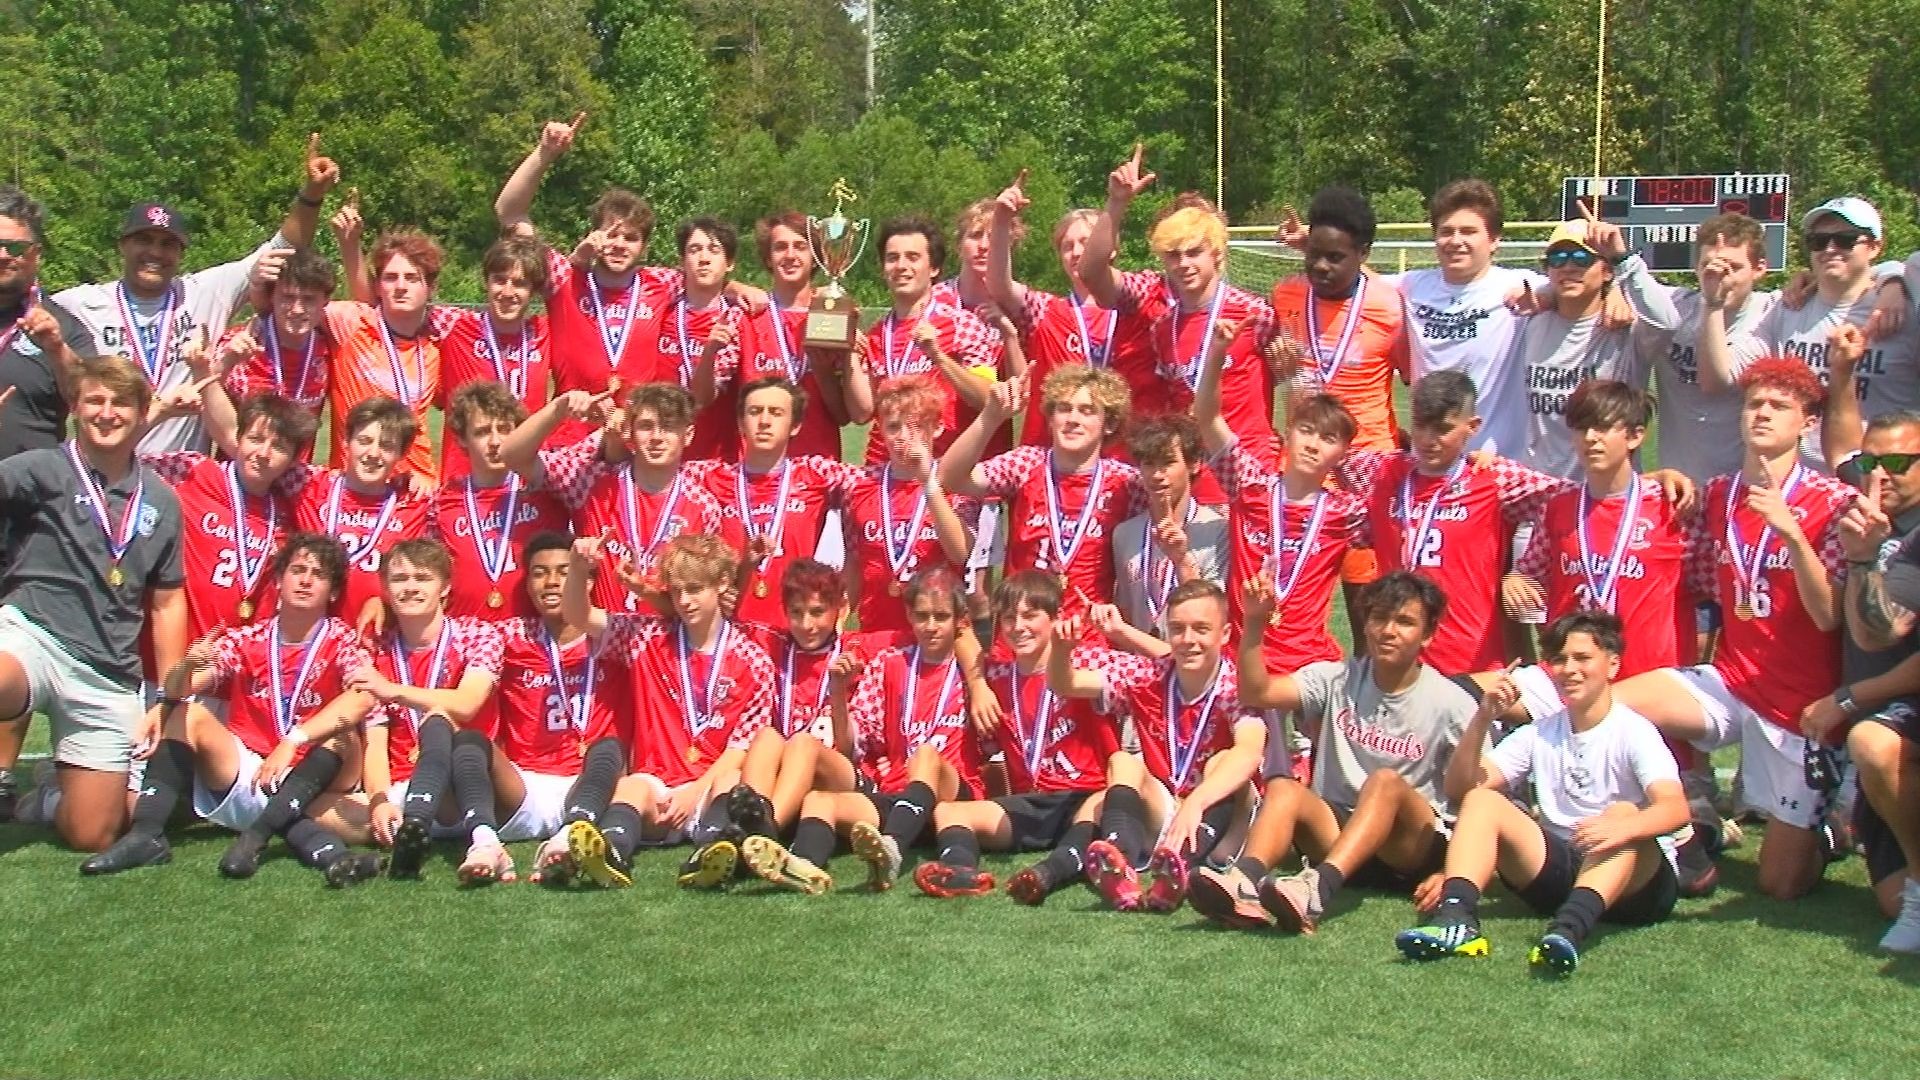 For the second time in the last three years, the Cardinal Newman Boys soccer team are State Champions!